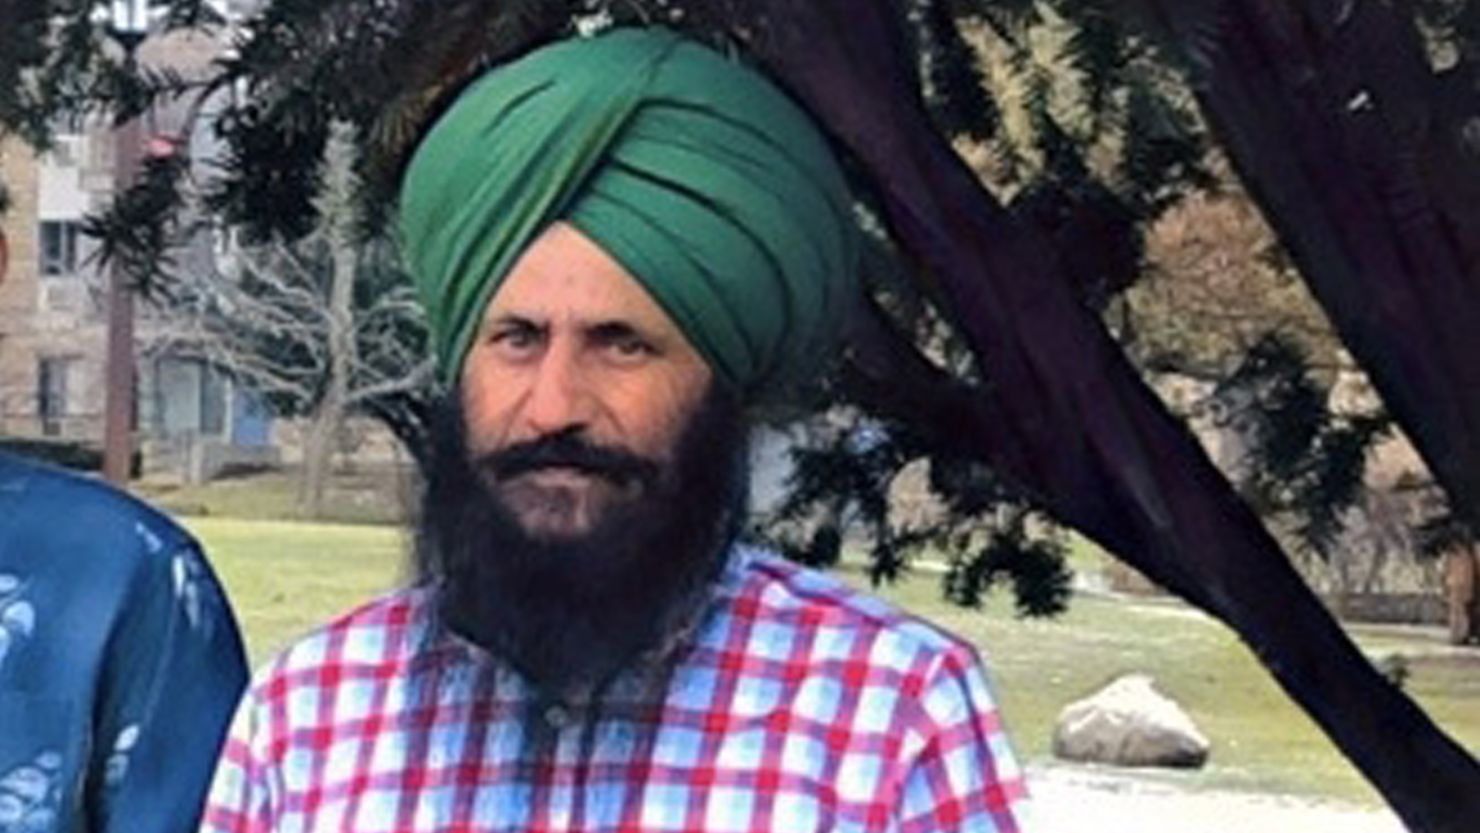 Surjit Singh, a 64-year-old Indian immigrant, was forced to go against his religion and shave his beard during the intake process in Arizona's corrections system, legal advocacy groups said.